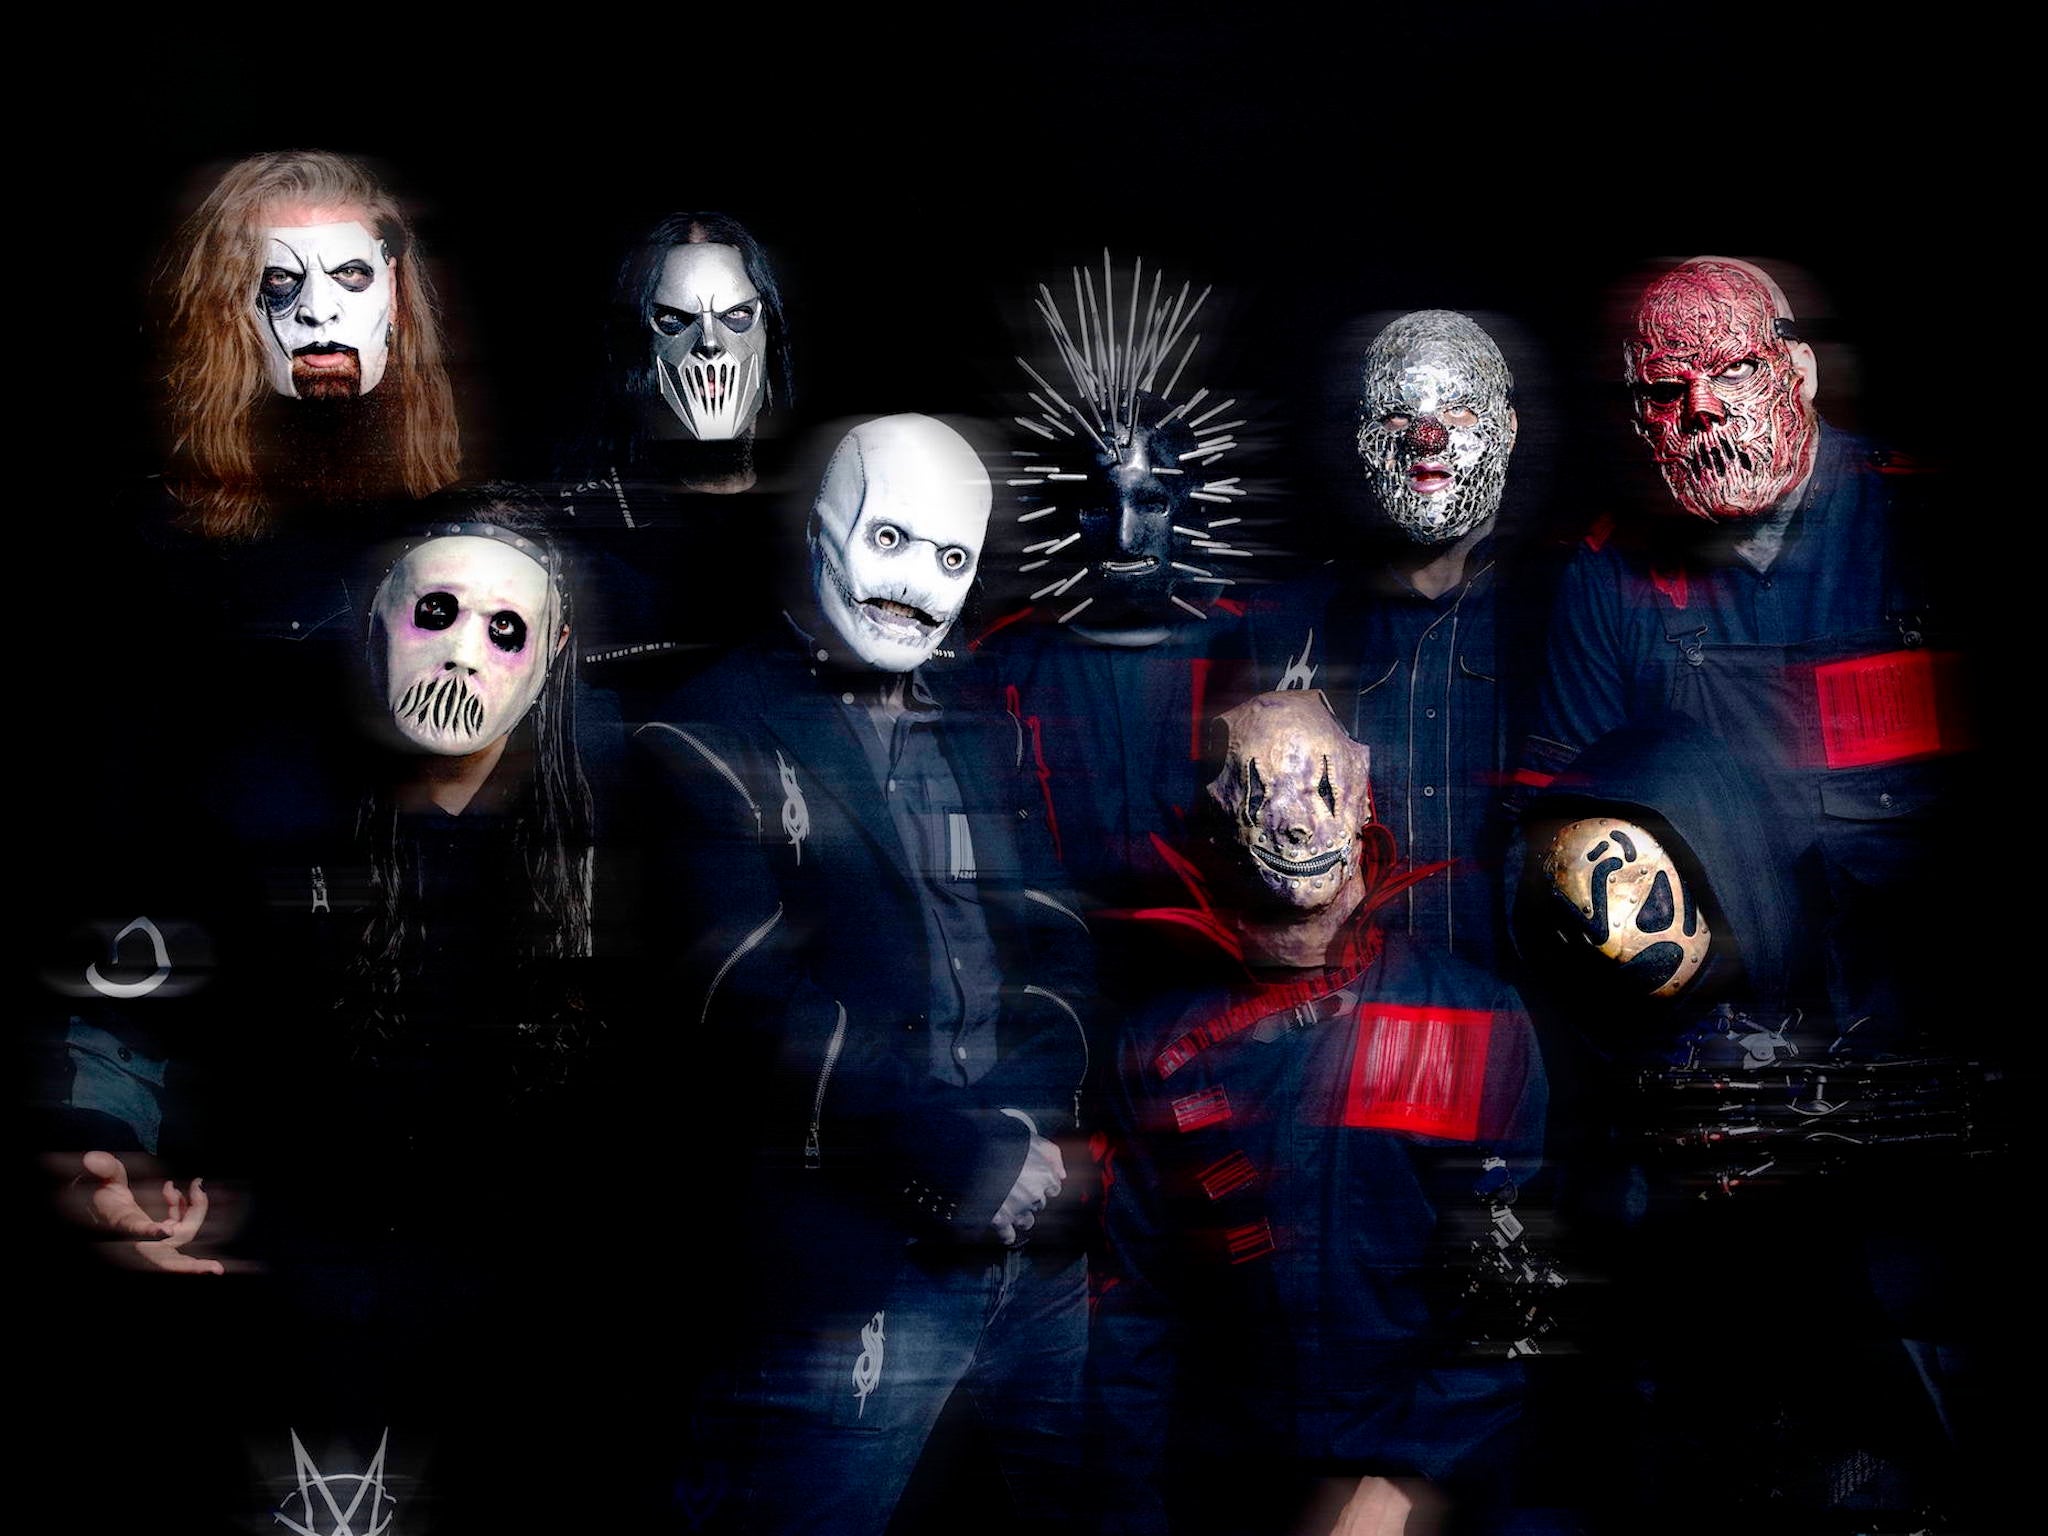 Slipknot's Shawn Crahan: 'I know what real evil is now… My past problems  are minuscule compared to the path my wife and I are on